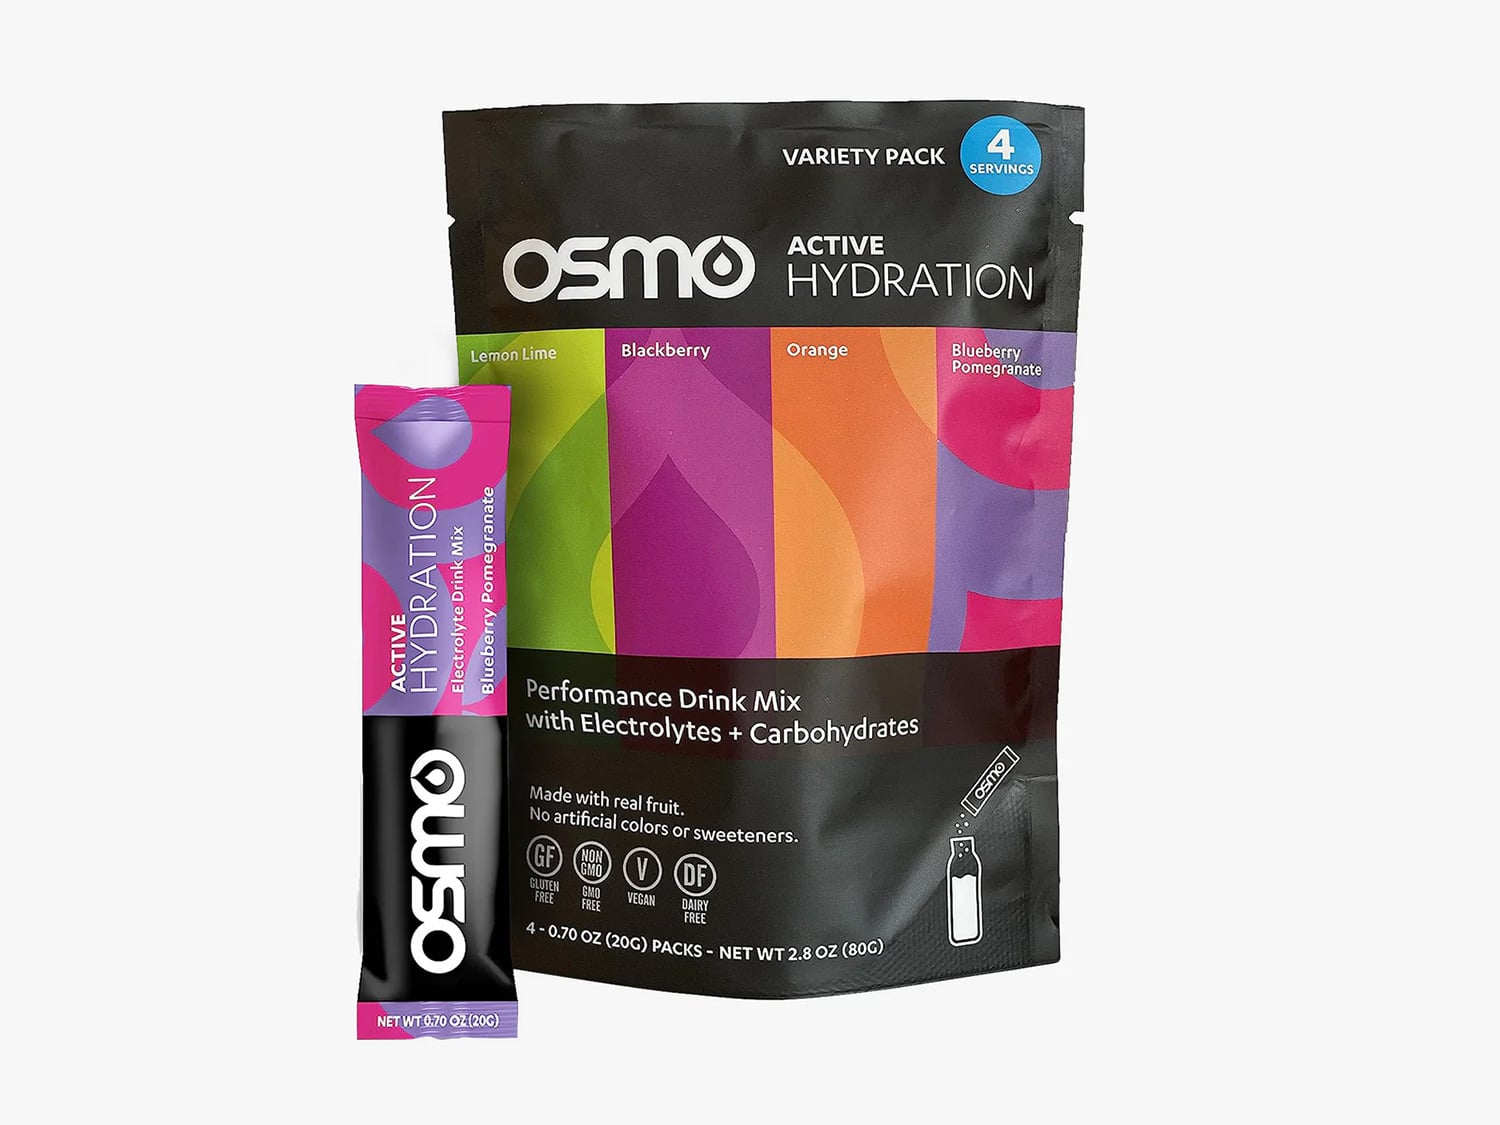 An assortment of Osmo Hydration packets